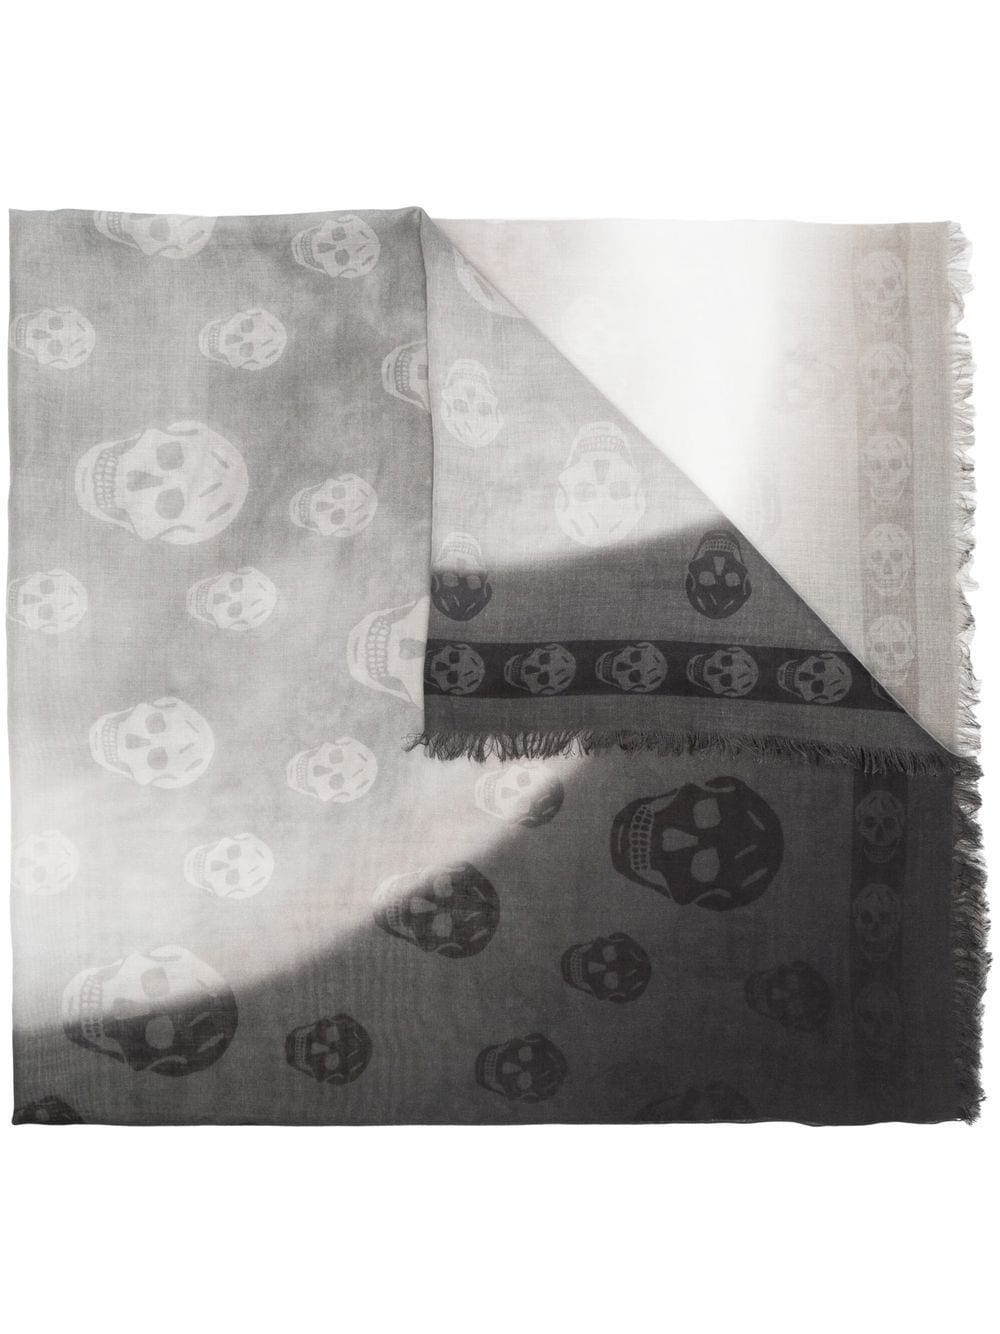 ALEXANDER MCQUEEN GREY SHADED SCARF WITH PRINT